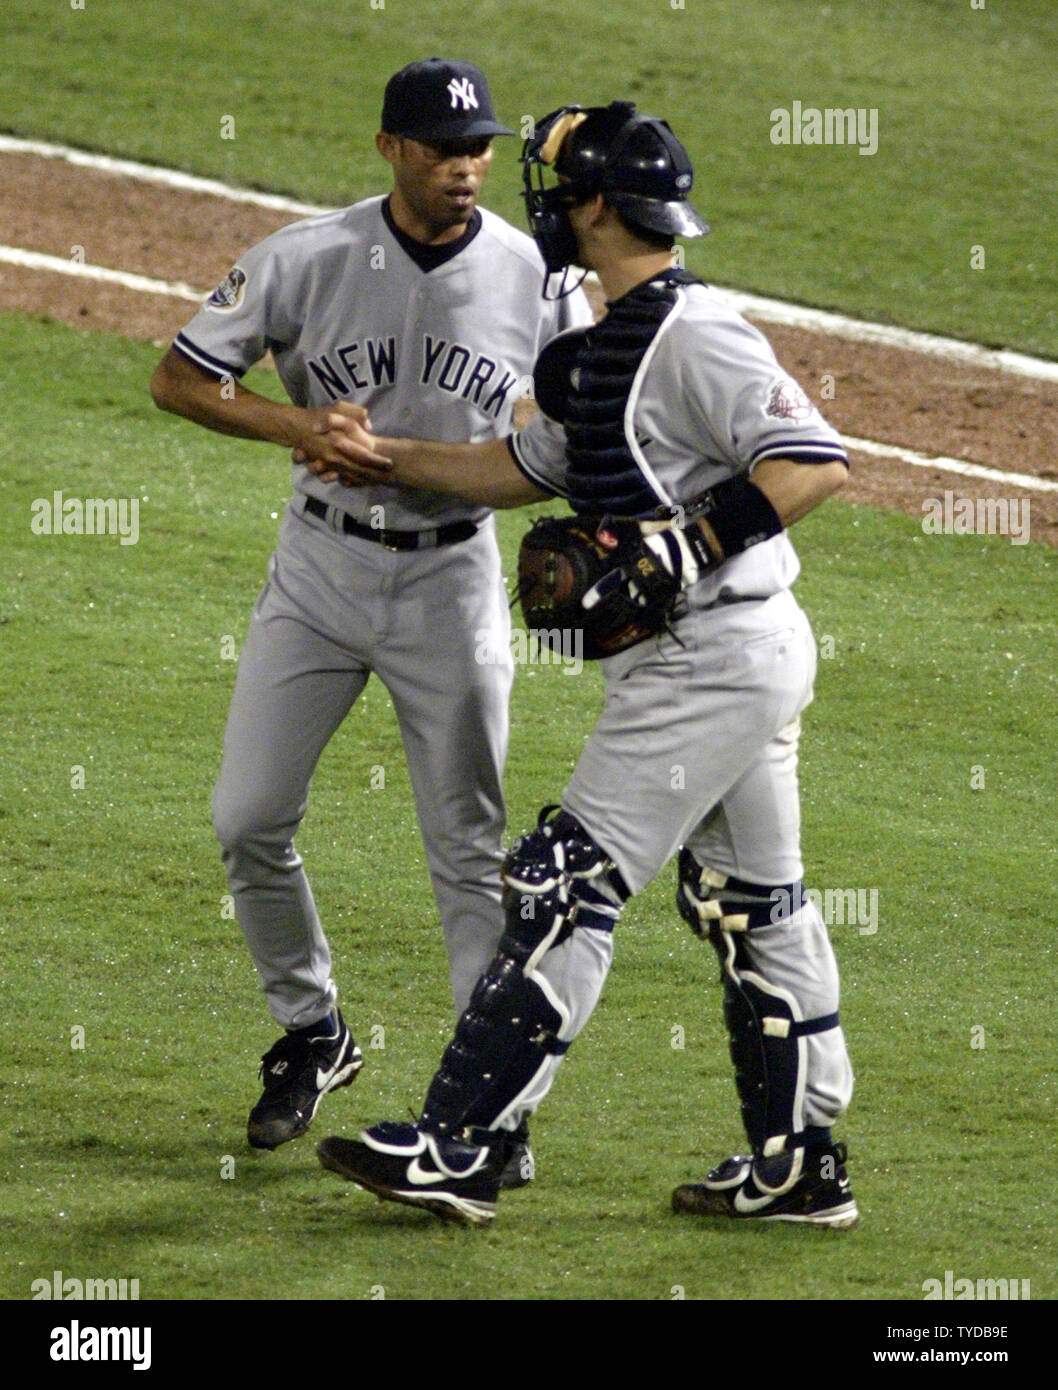 New York Yankees catcher Jorge Posada celebrates with Mariano Rivera after they beat the Florida Marlins 6-1 in game 3 of the 2003 MLB World Series, at Pro Player Stadium, Miami, Florida, October 21, 2003..   (UPI/MICHAEL BUSH) Stock Photo